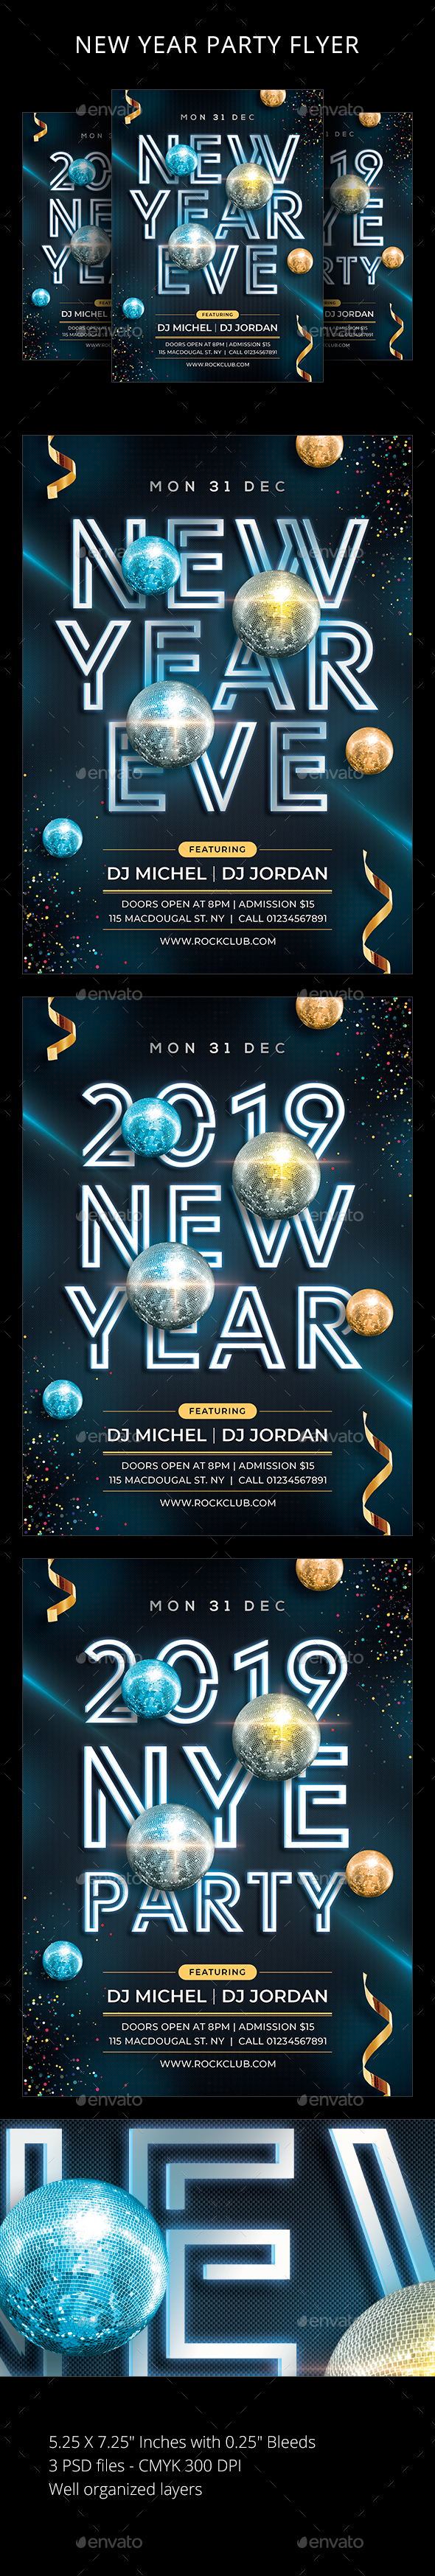 New Year Flyer - Clubs & Parties Events